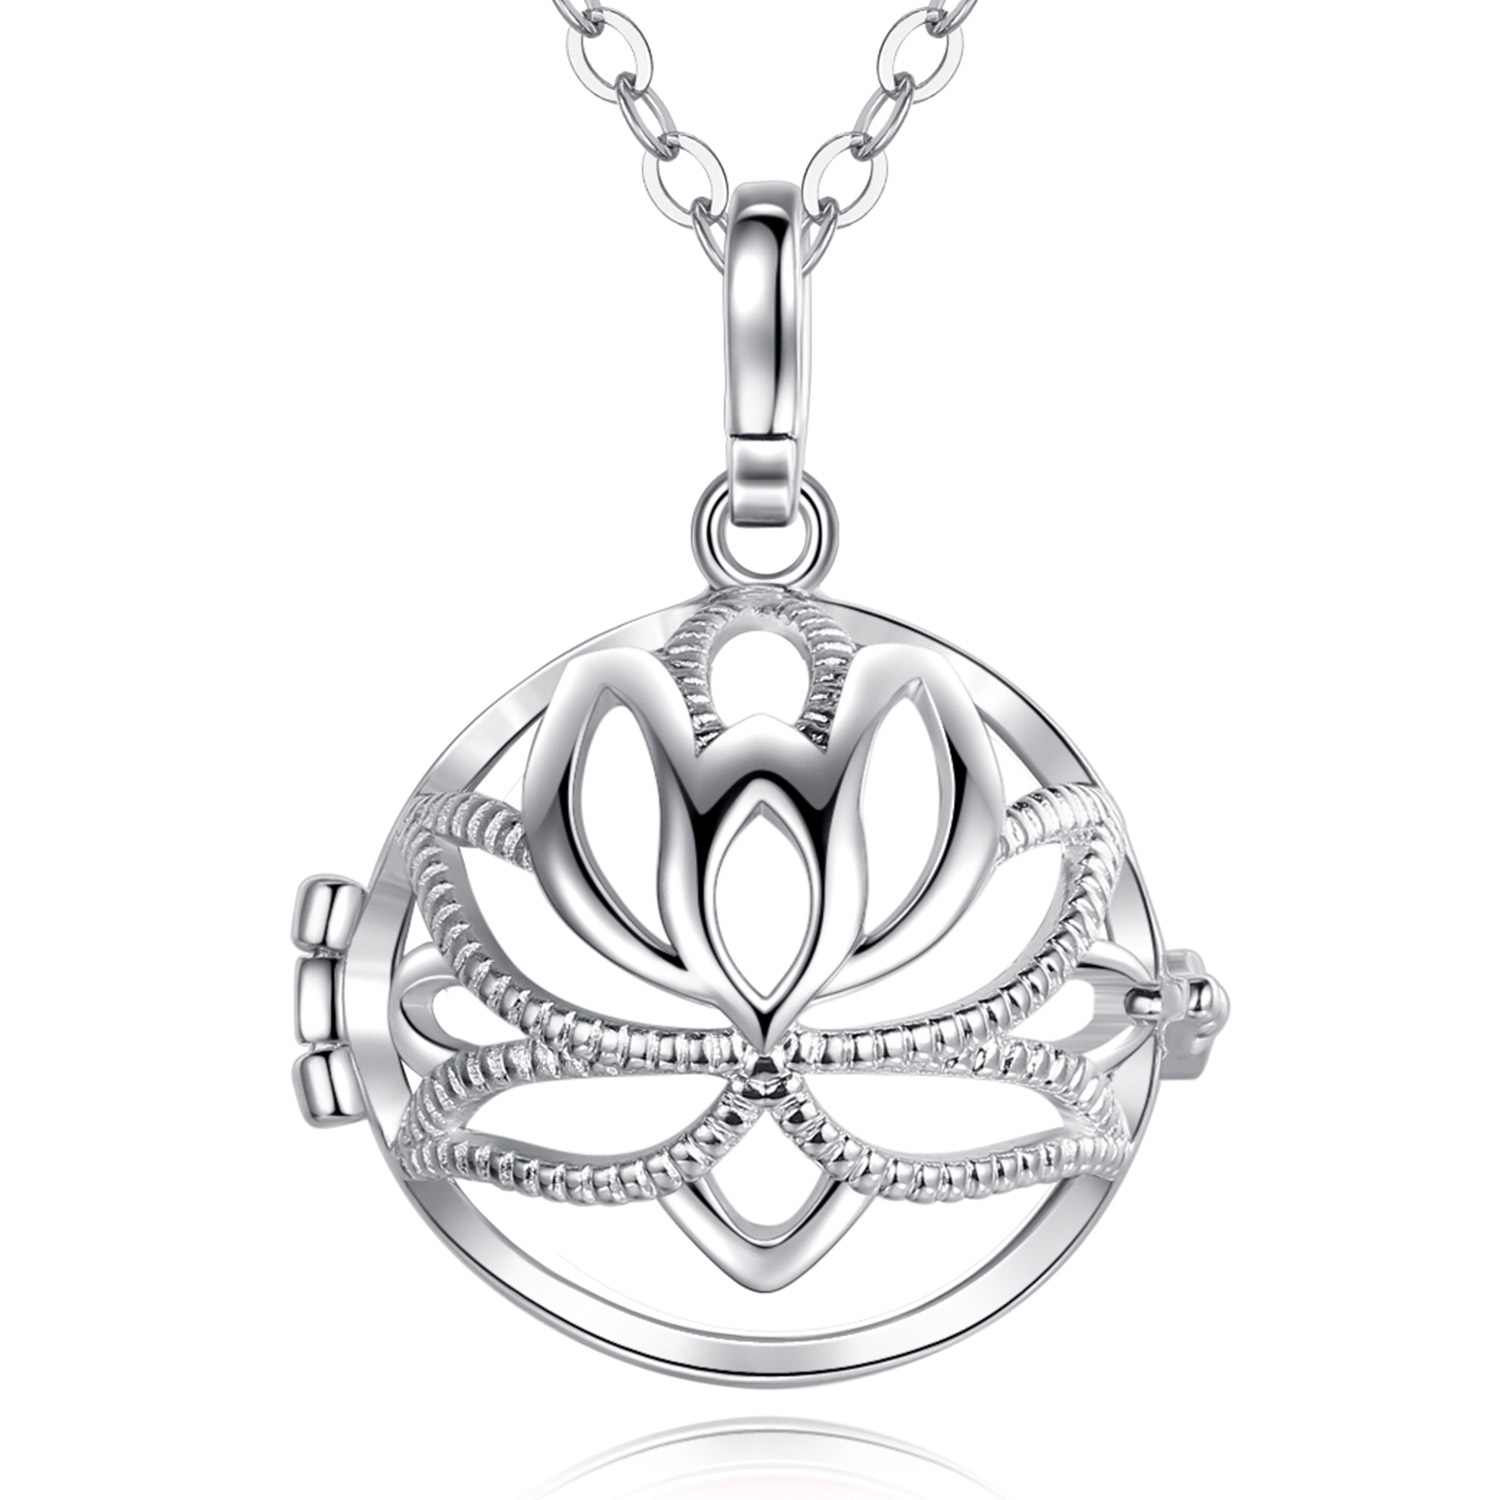 Merryshine Jewelry S925 Sterling Silver Lotus Hollowed-out Cage Angel Chime Bola Sound Harmony Ball Necklace